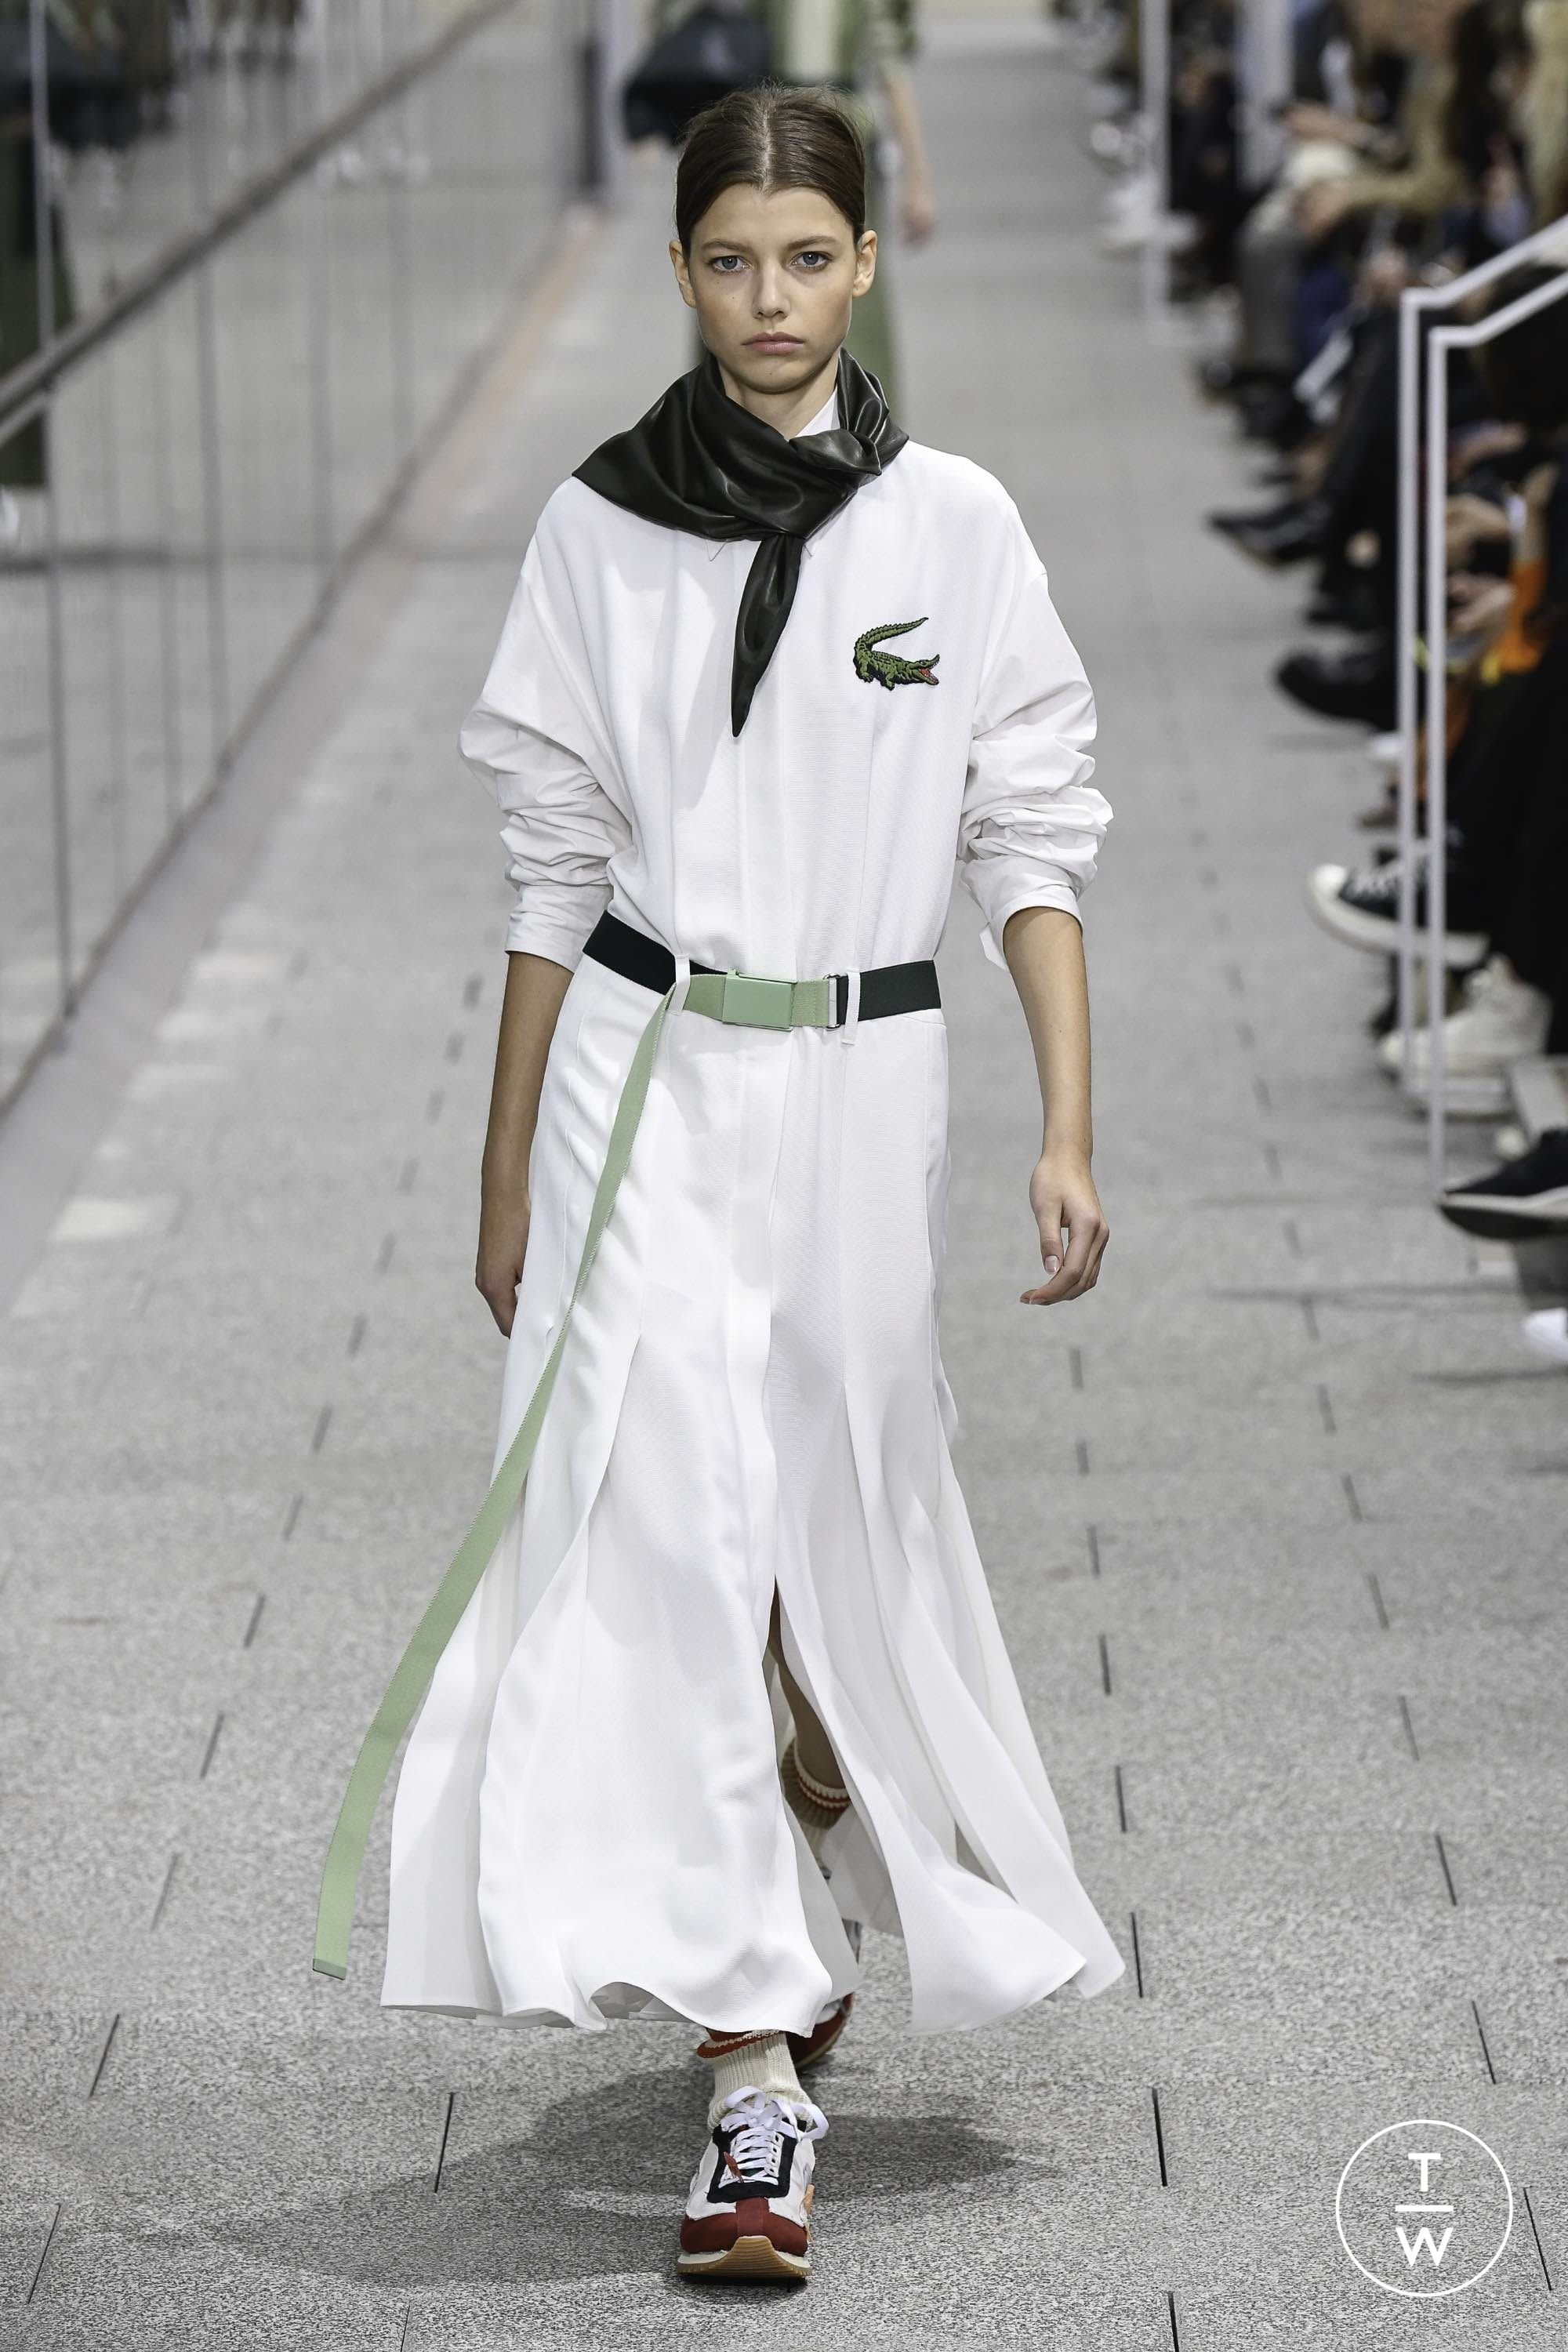 elasticitet etc Ved lov Lacoste SS20 womenswear #39 - The Fashion Search Engine - TAGWALK